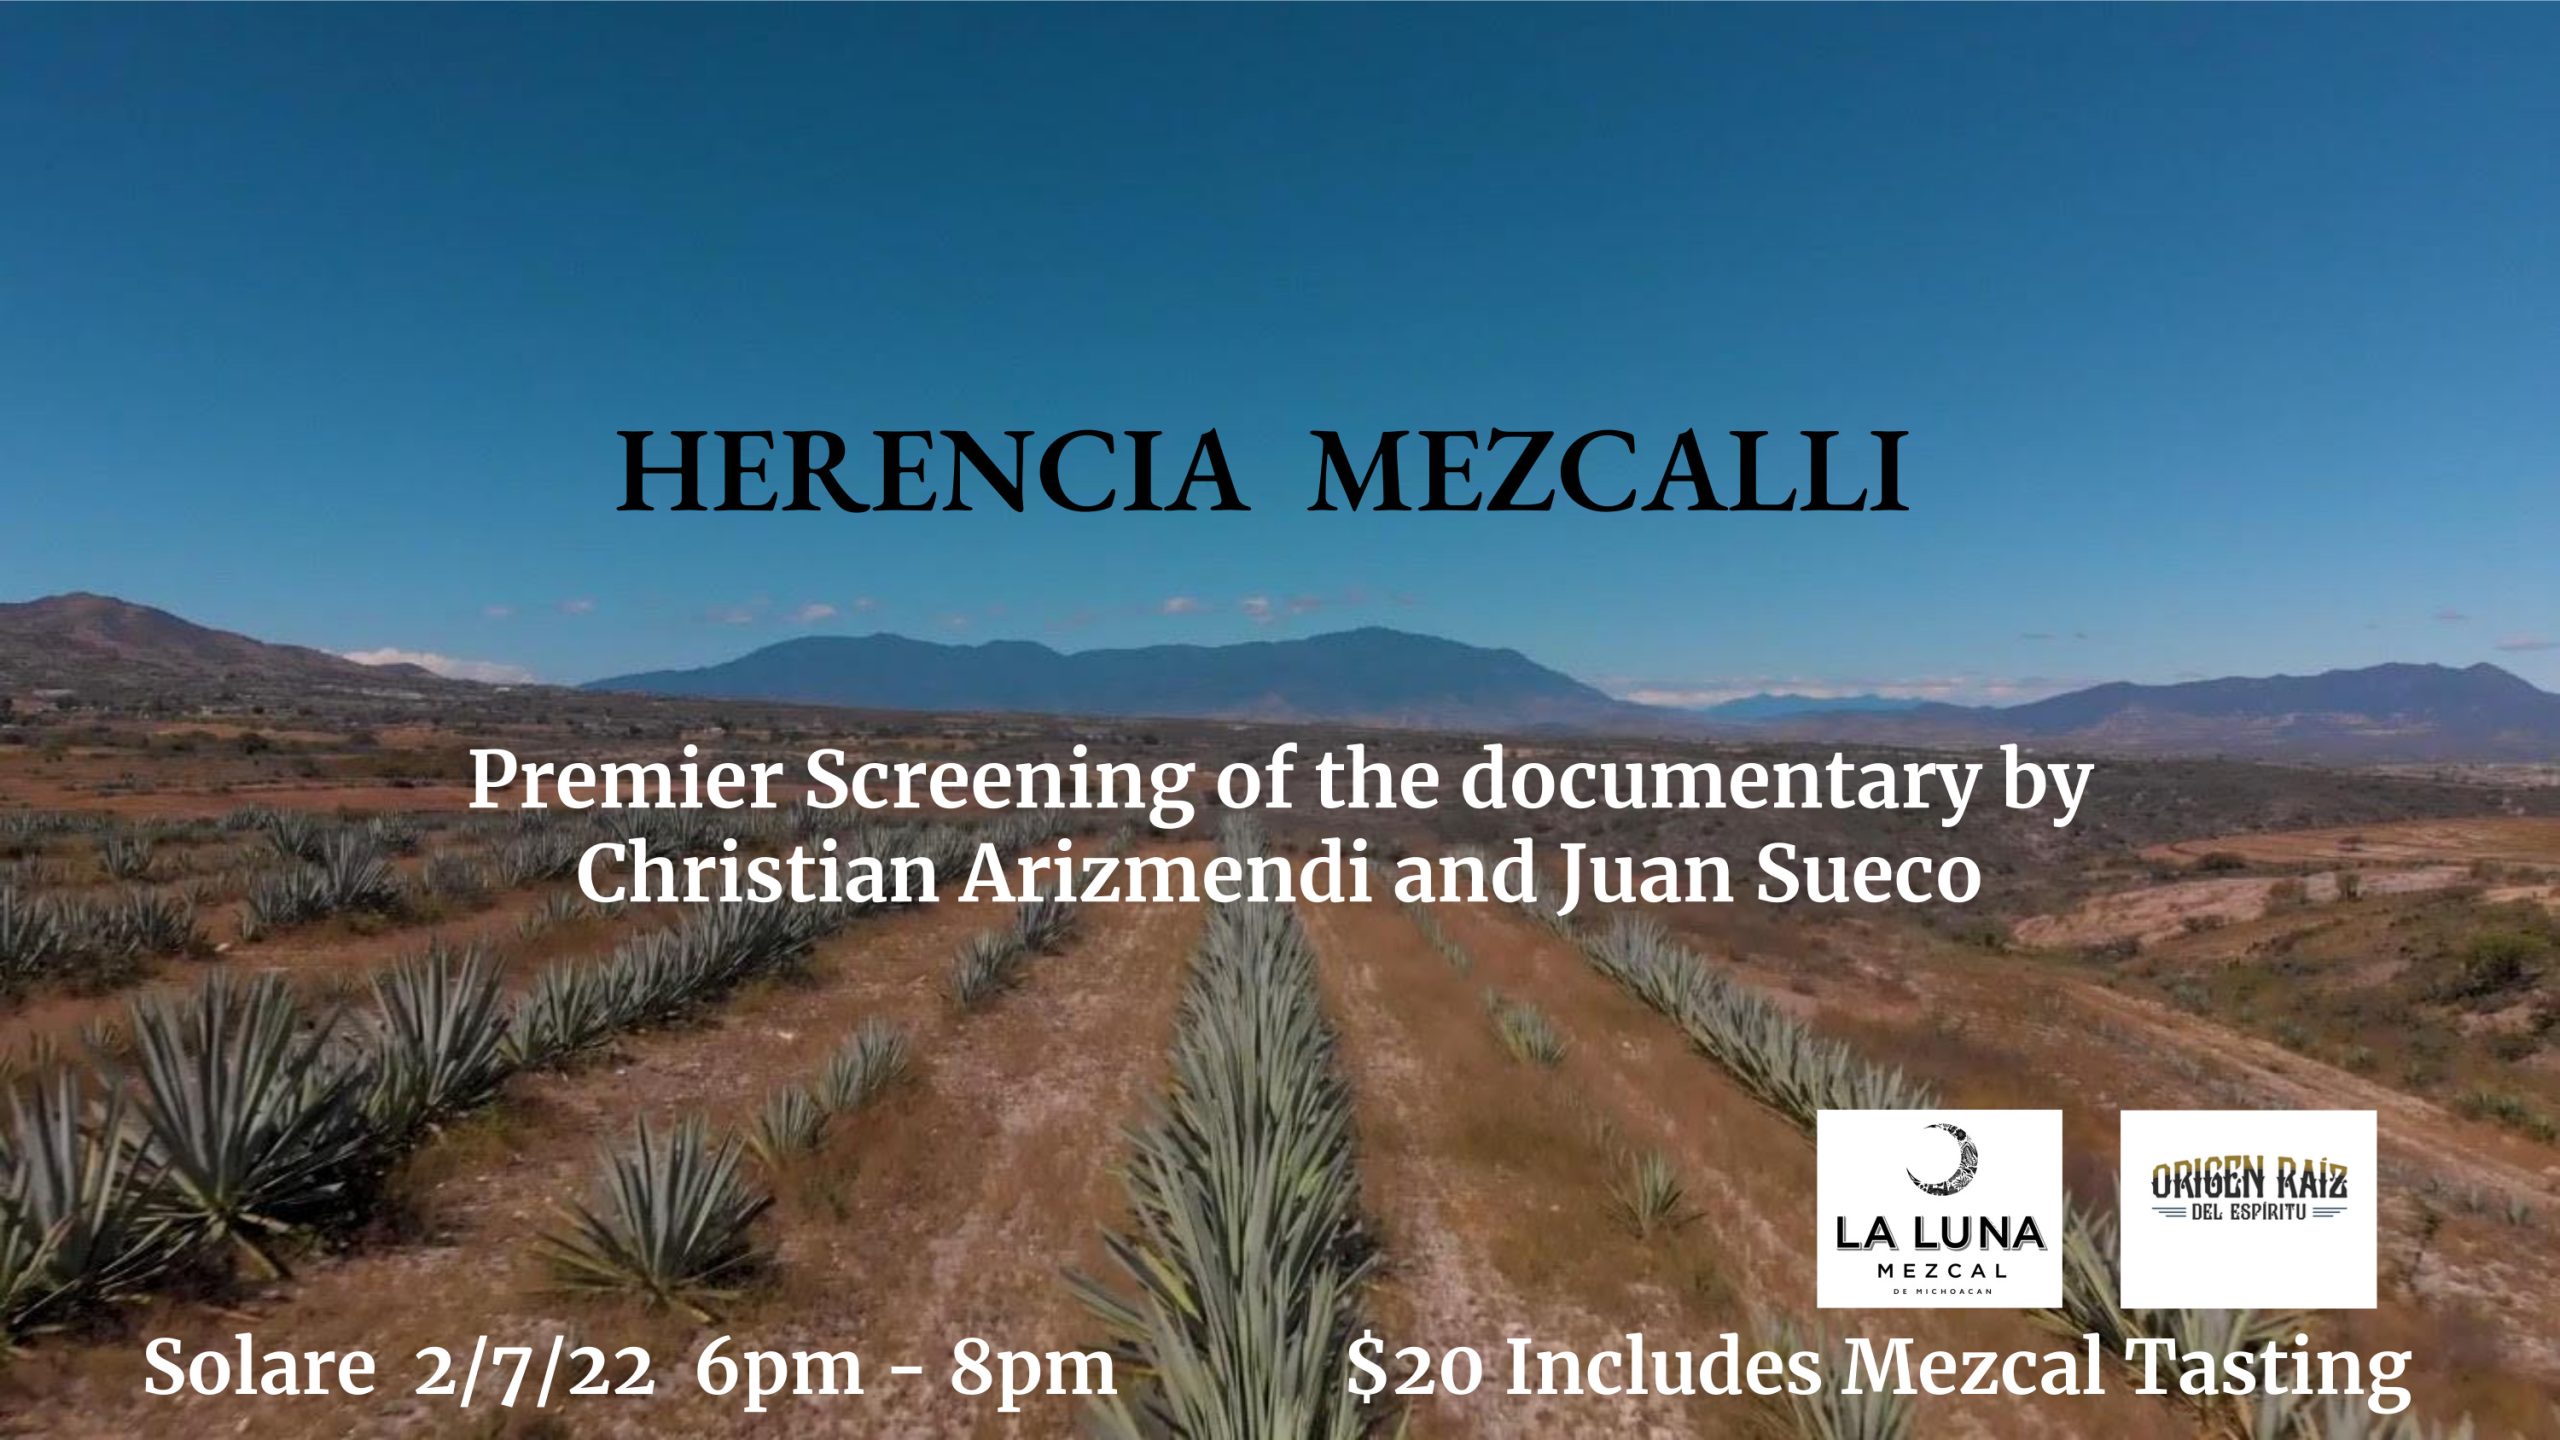 <a id="Solare-Herencia-Mezcal-Debut"></a>An Evening of Mezcal - and Debut Screening of "Herencia Mezcalli"